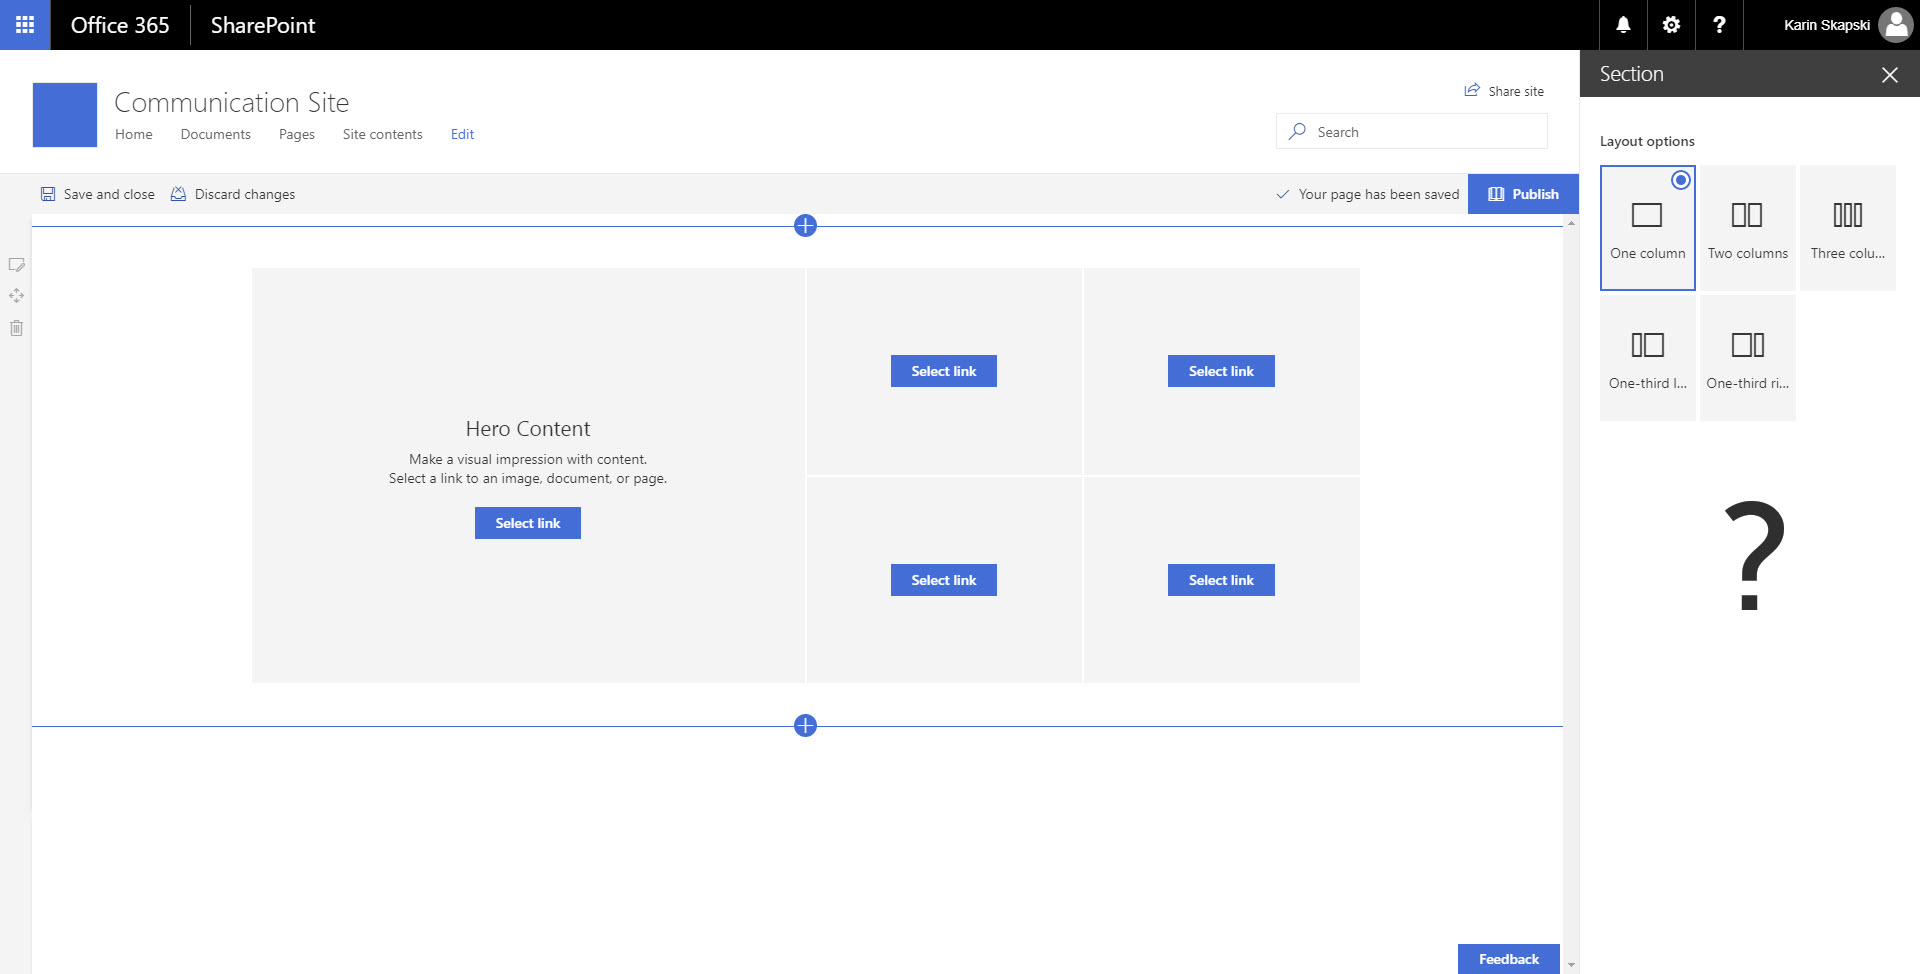 SharePoint Communication Site - Container Layout Options